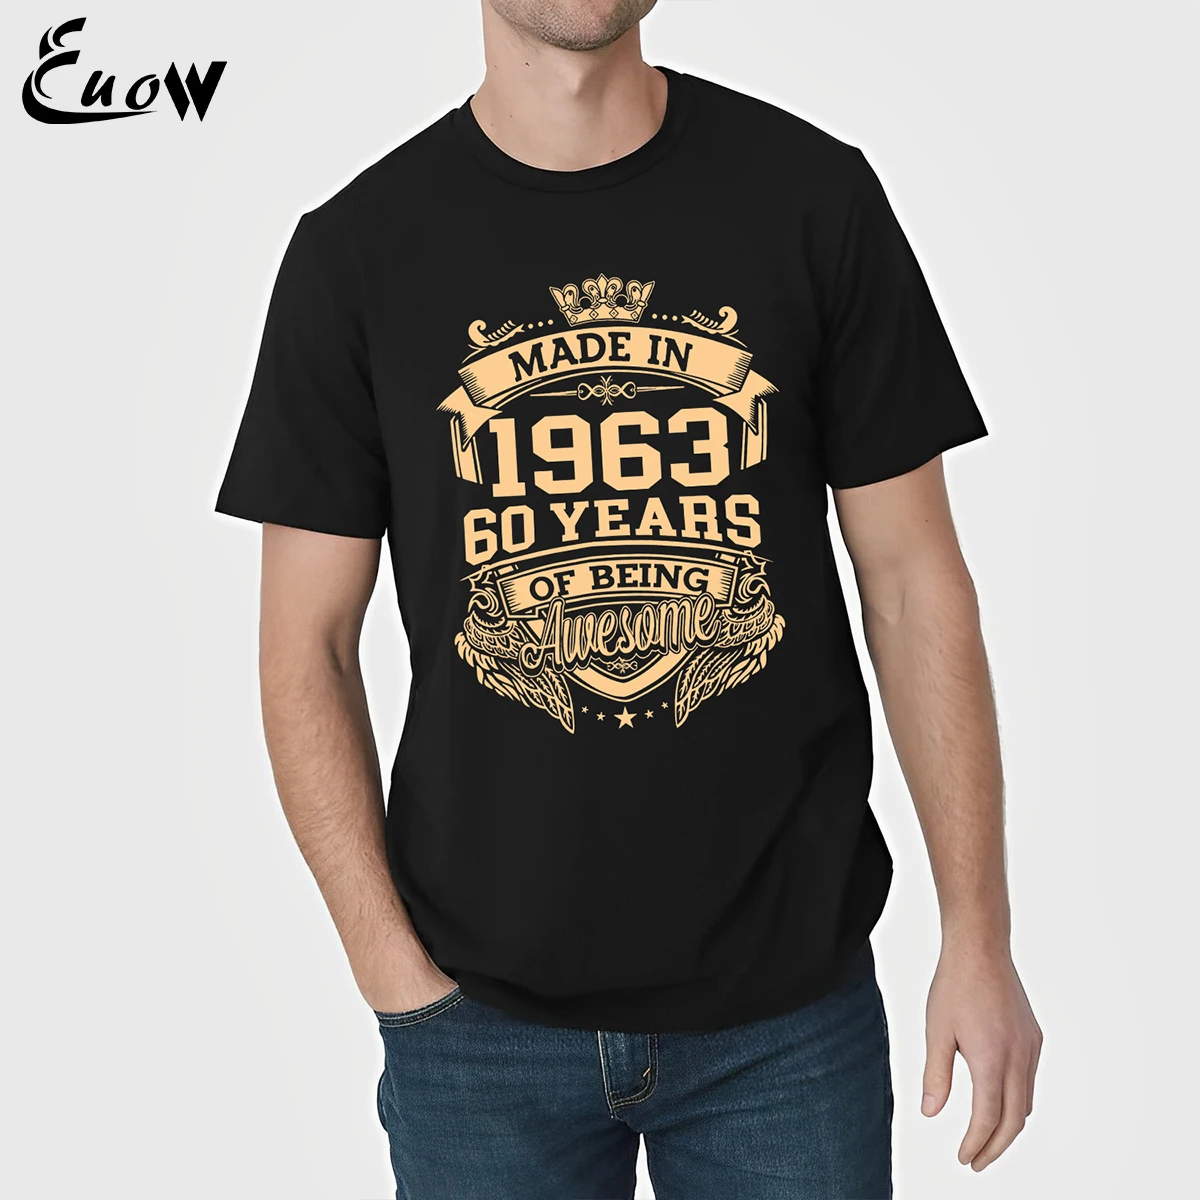 

Euow Unisex 100% Cotton Made In 1963 60 Years Of Being Awesome 60th Birthday Vintage Men Clothing T-Shirt Casual Luxury Tee Tops